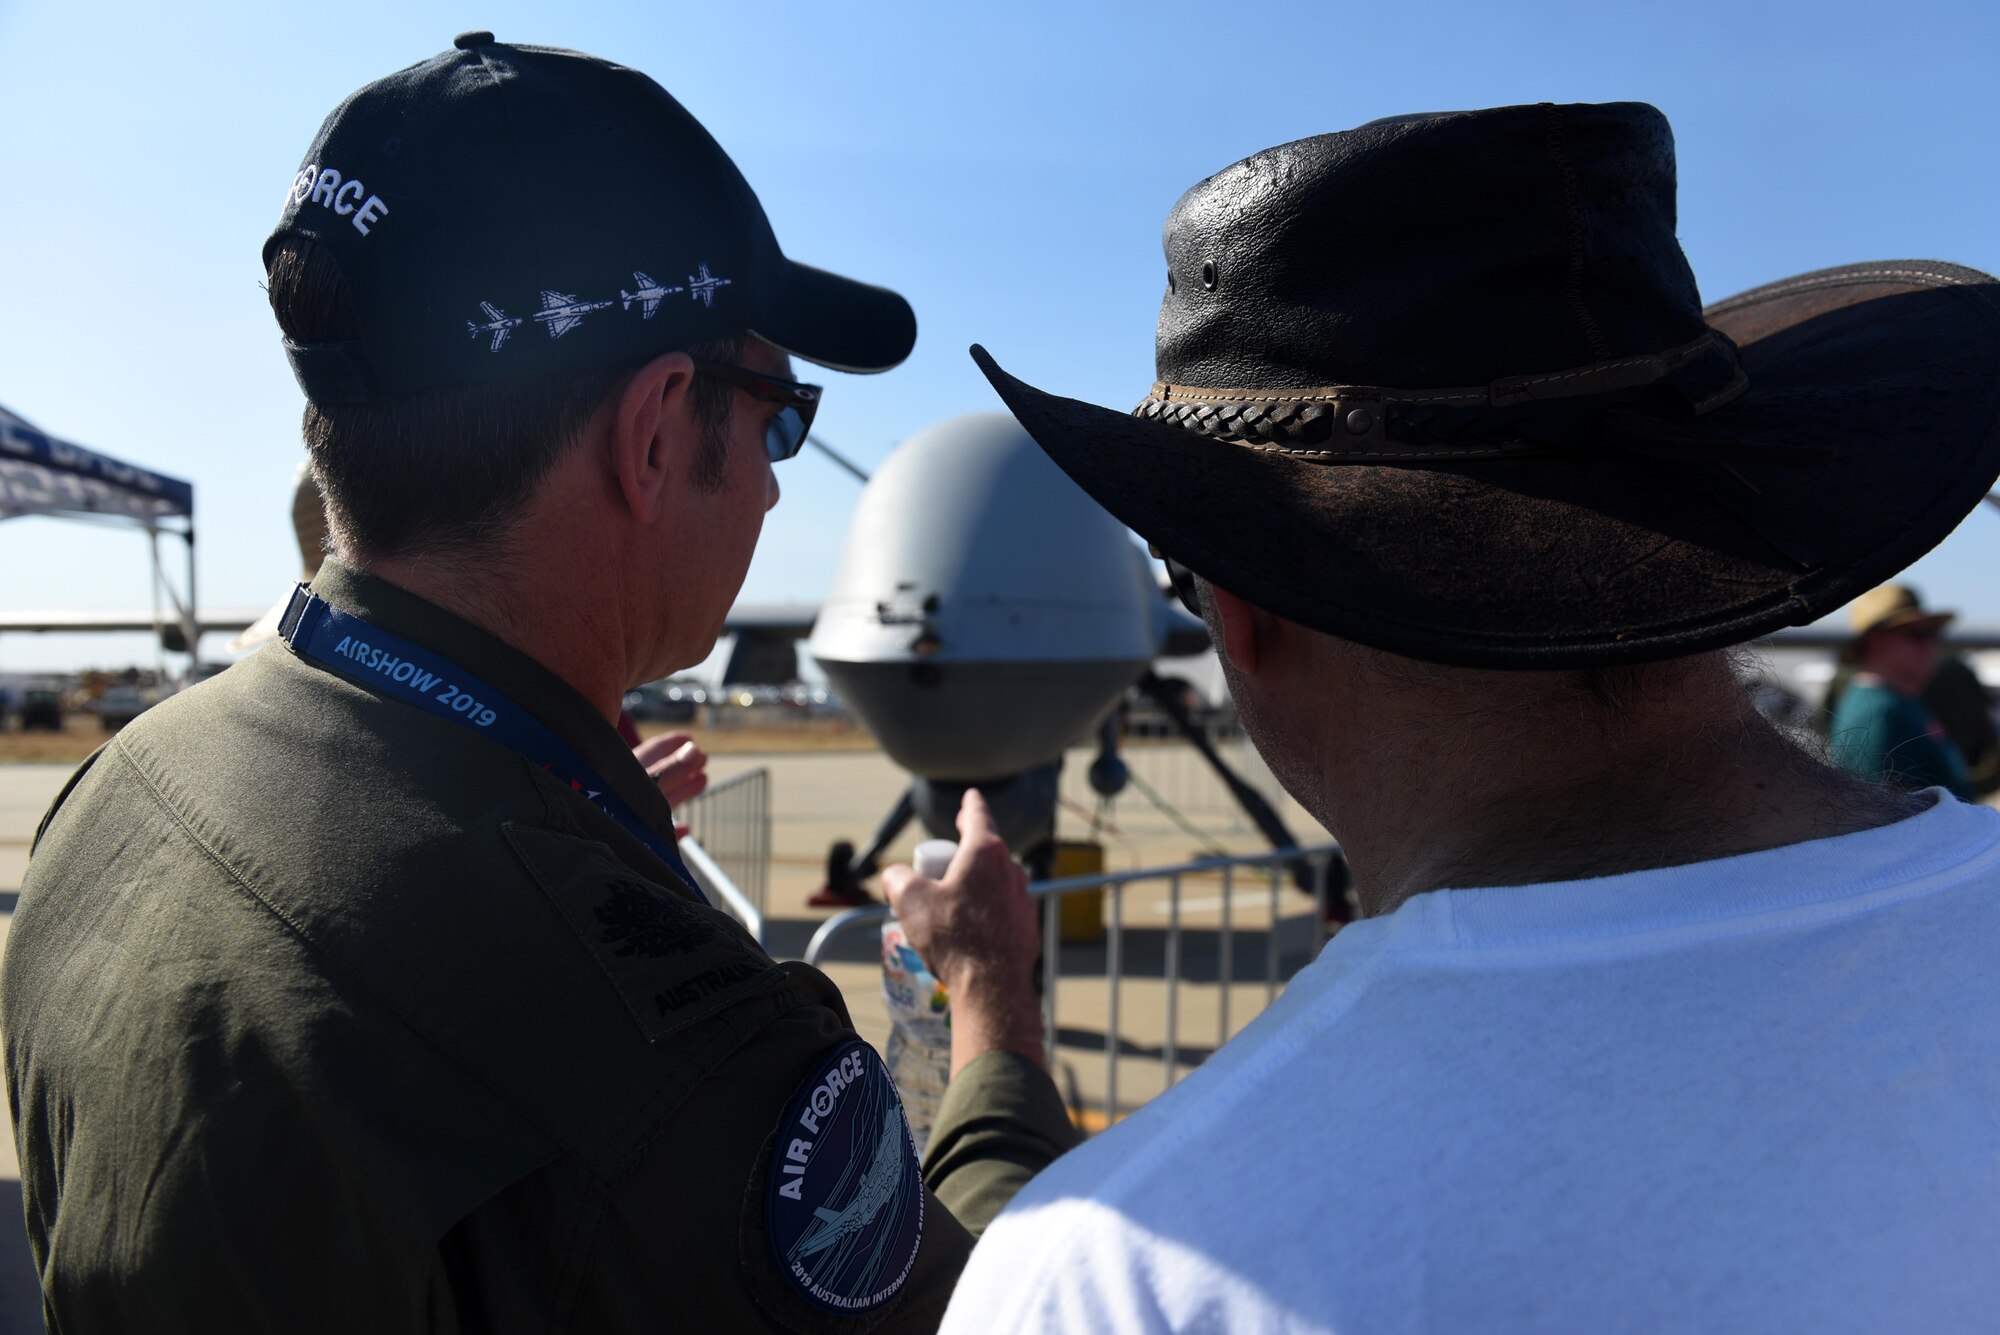 A member of the Royal Australian Air Force answers a question during the Australian International Airshow, Mar. 2, 2019, in Geelong, Victoria, Australia. The MQ-9 proved to be a popular attraction due to its unique capabilities and the team’s mission of persistent attack and reconnaissance. (U.S. Air Force photo by Airman 1st Class Haley Stevens)